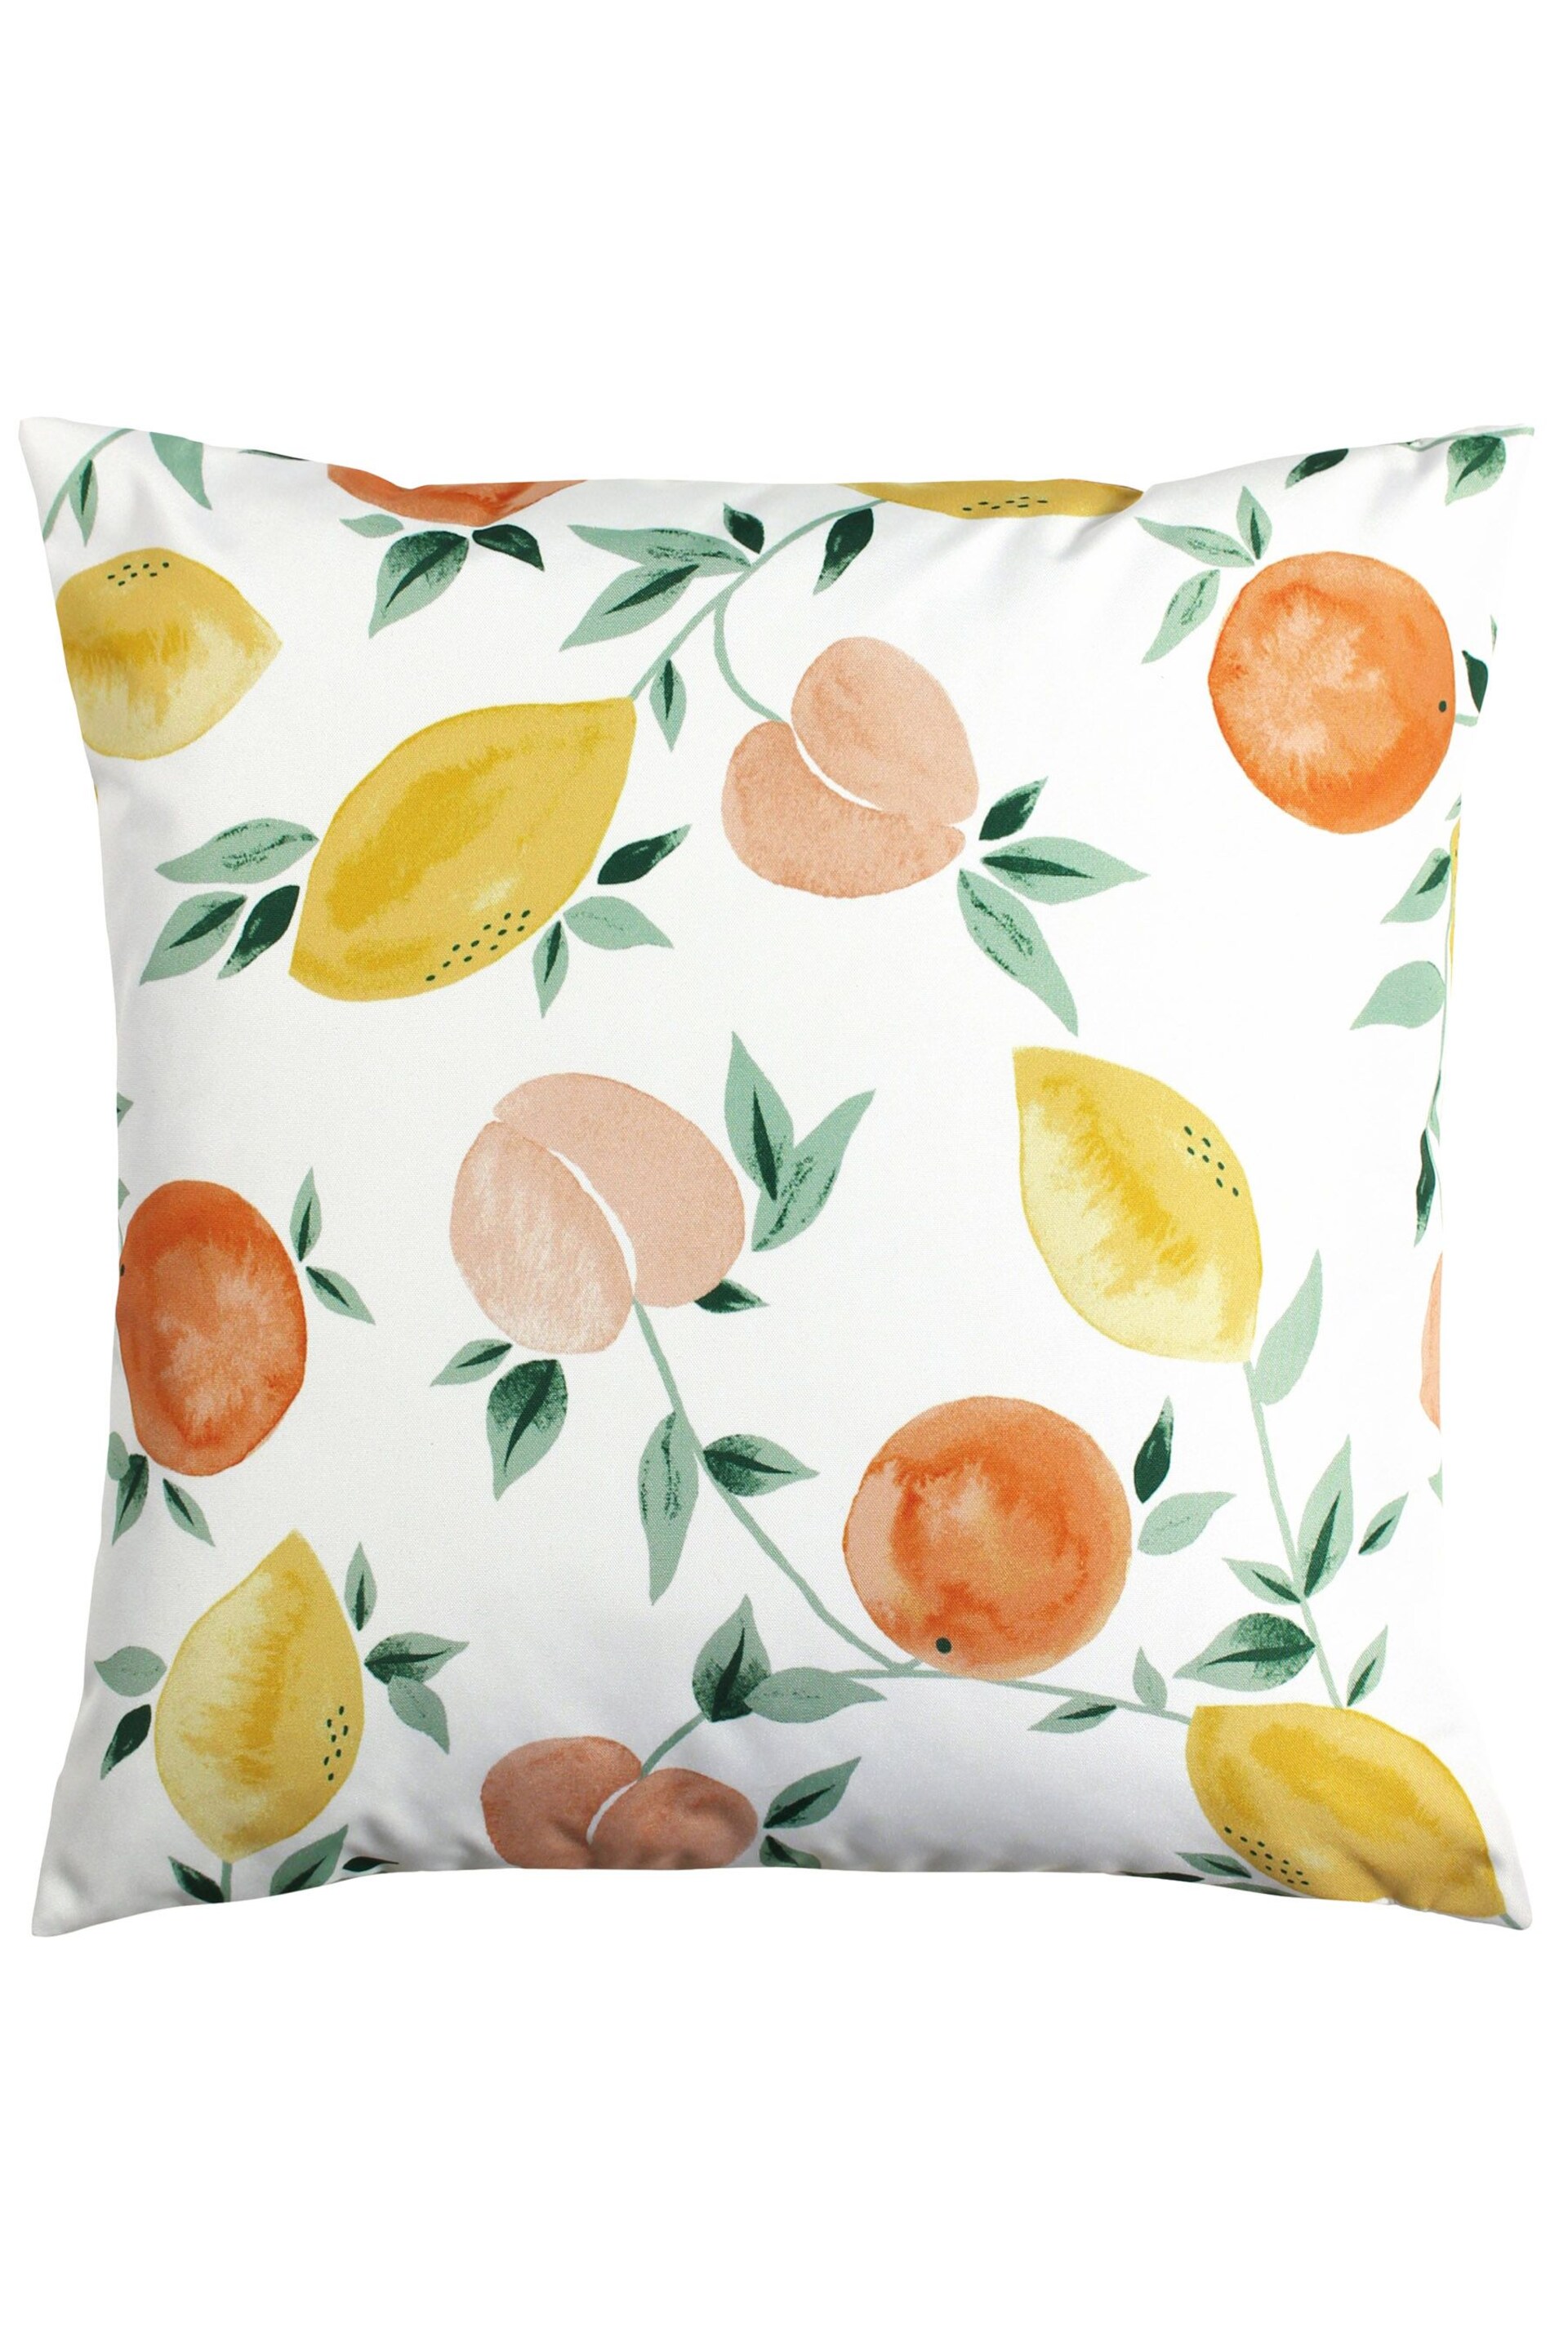 furn. White Les Fruits Water Resistant Outdoor Cushion - Image 3 of 5